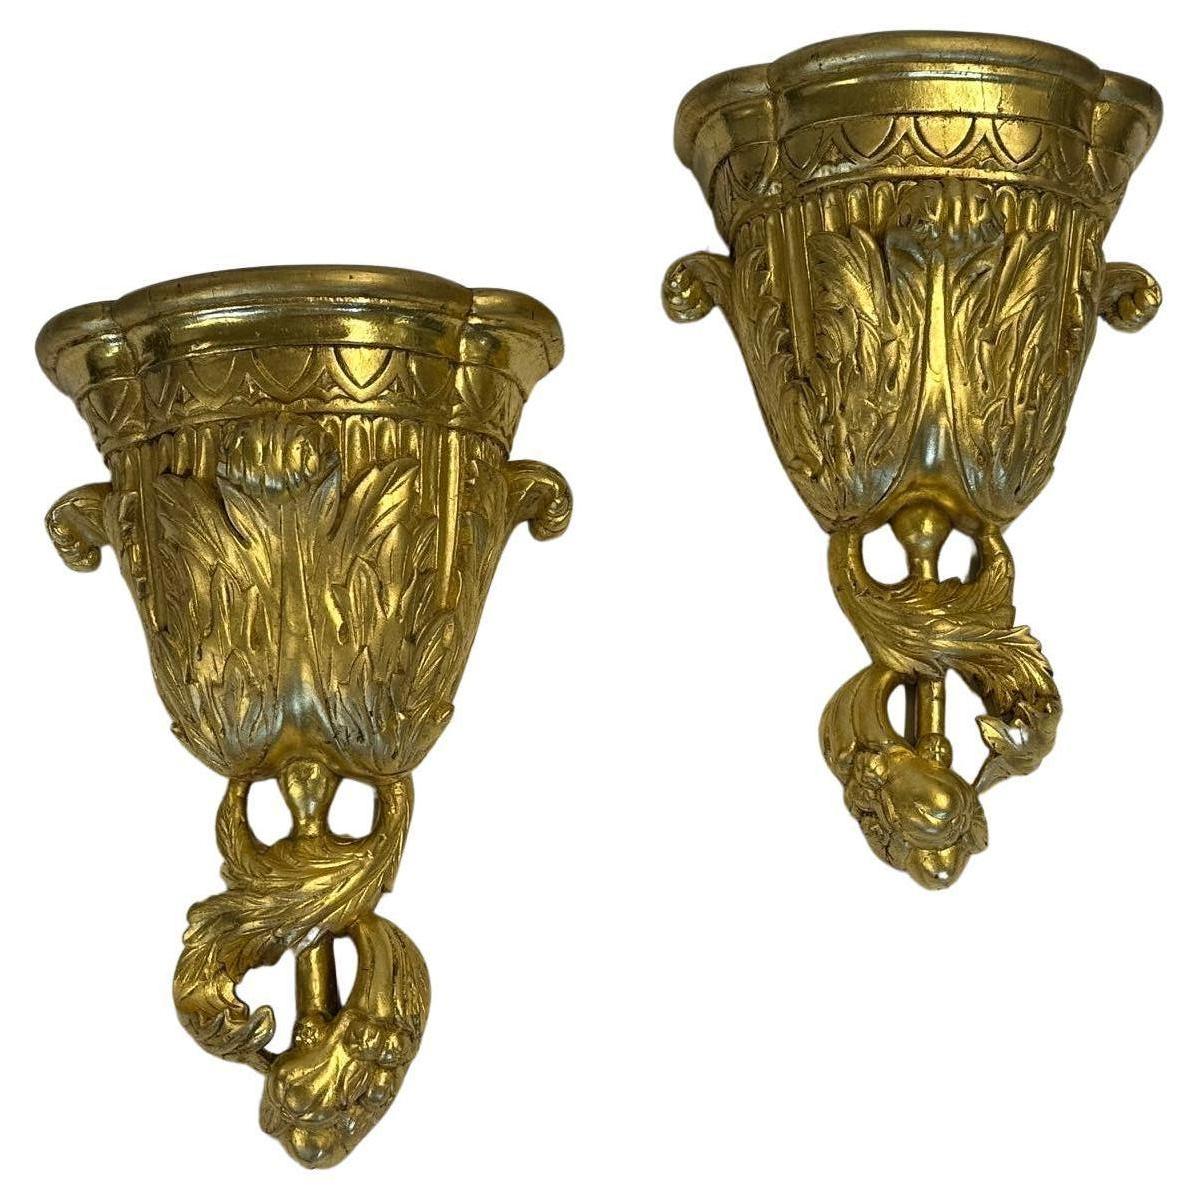 Glamorous Pair of Heavily Gilded Carved Wood Italian Wall Brackets